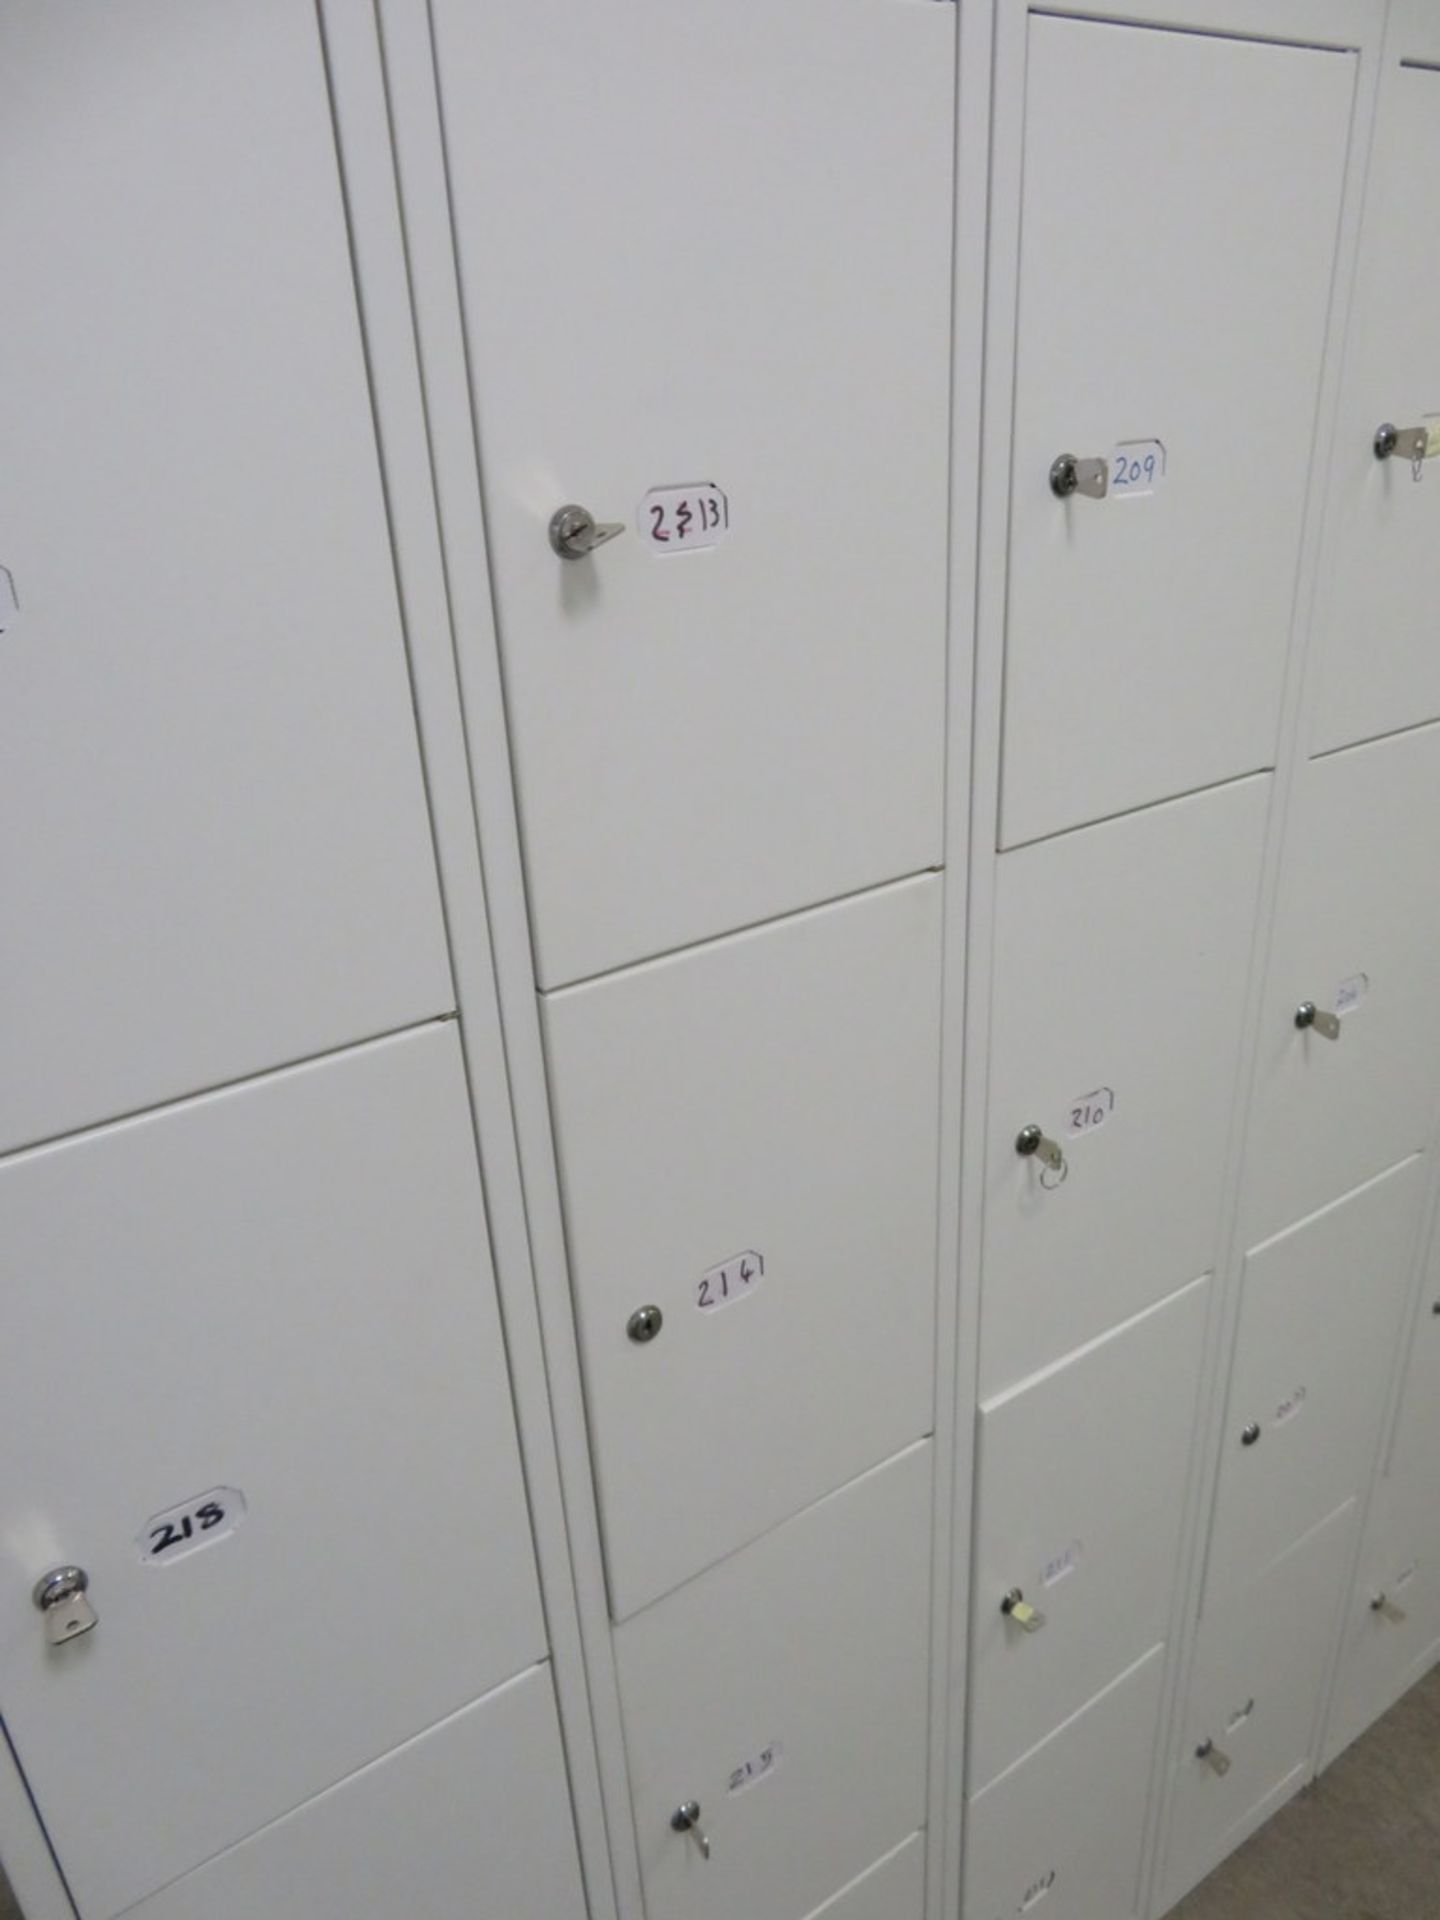 4x Bisley 4 Compartment Personnel Locker. - Image 2 of 3